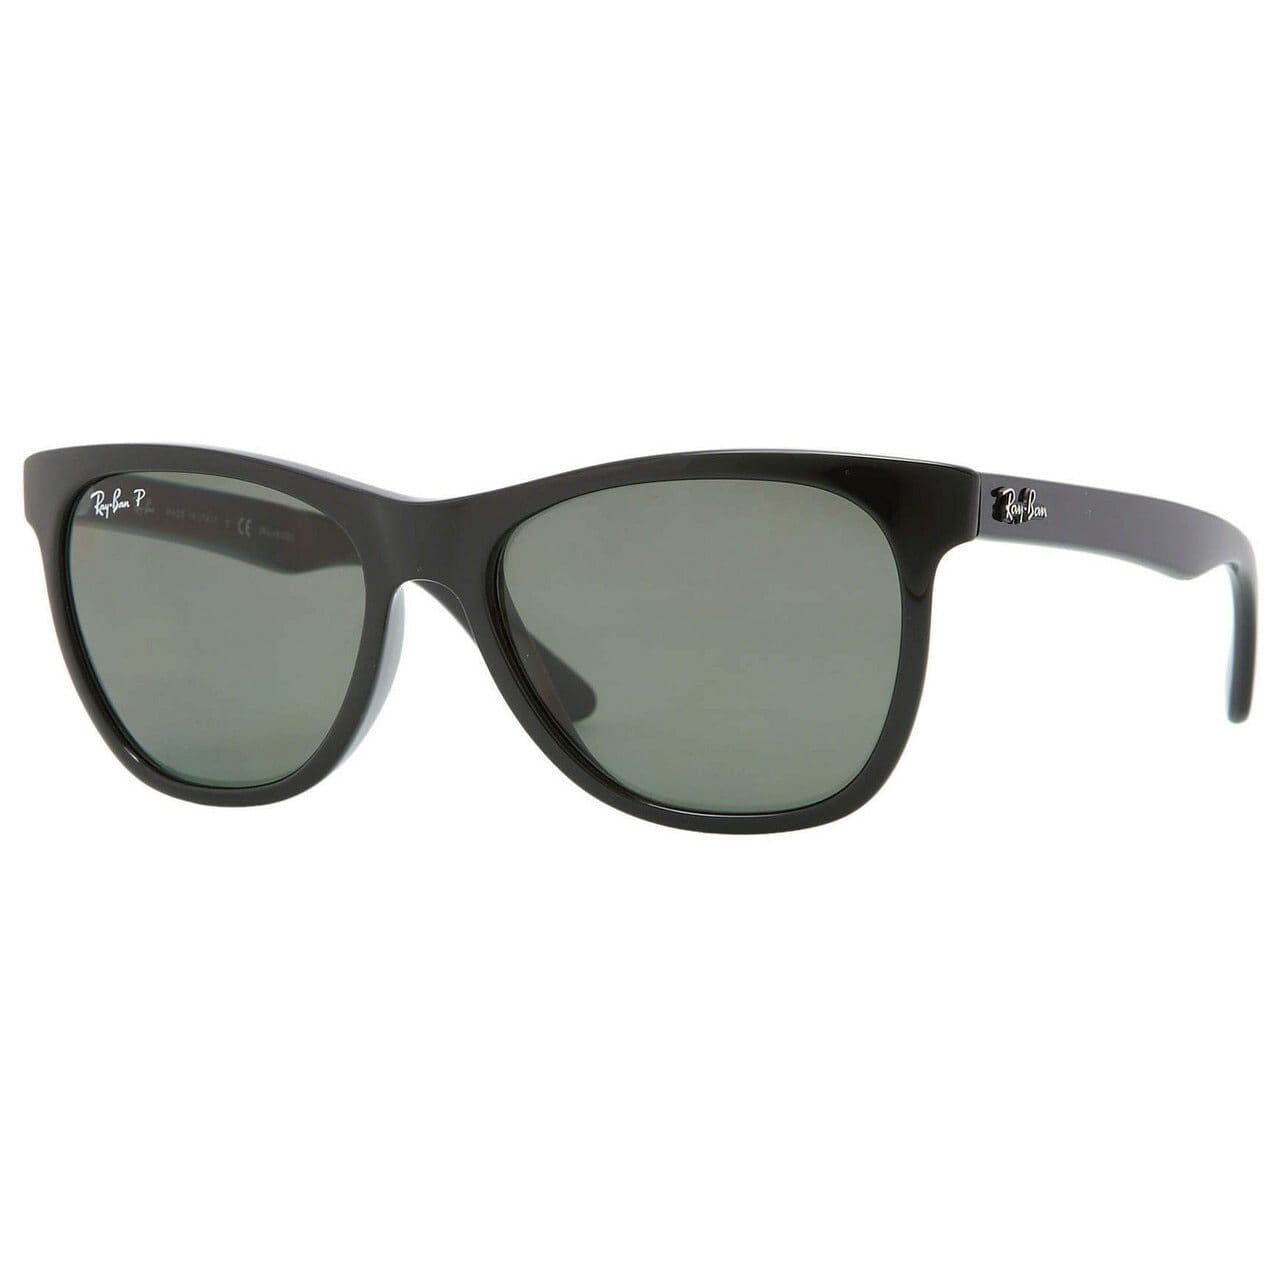 Ray-Ban RB4184 601/9A Hightstreet Black Square Green Classic G-15 Polarized Lens Sunglasses 713132572252